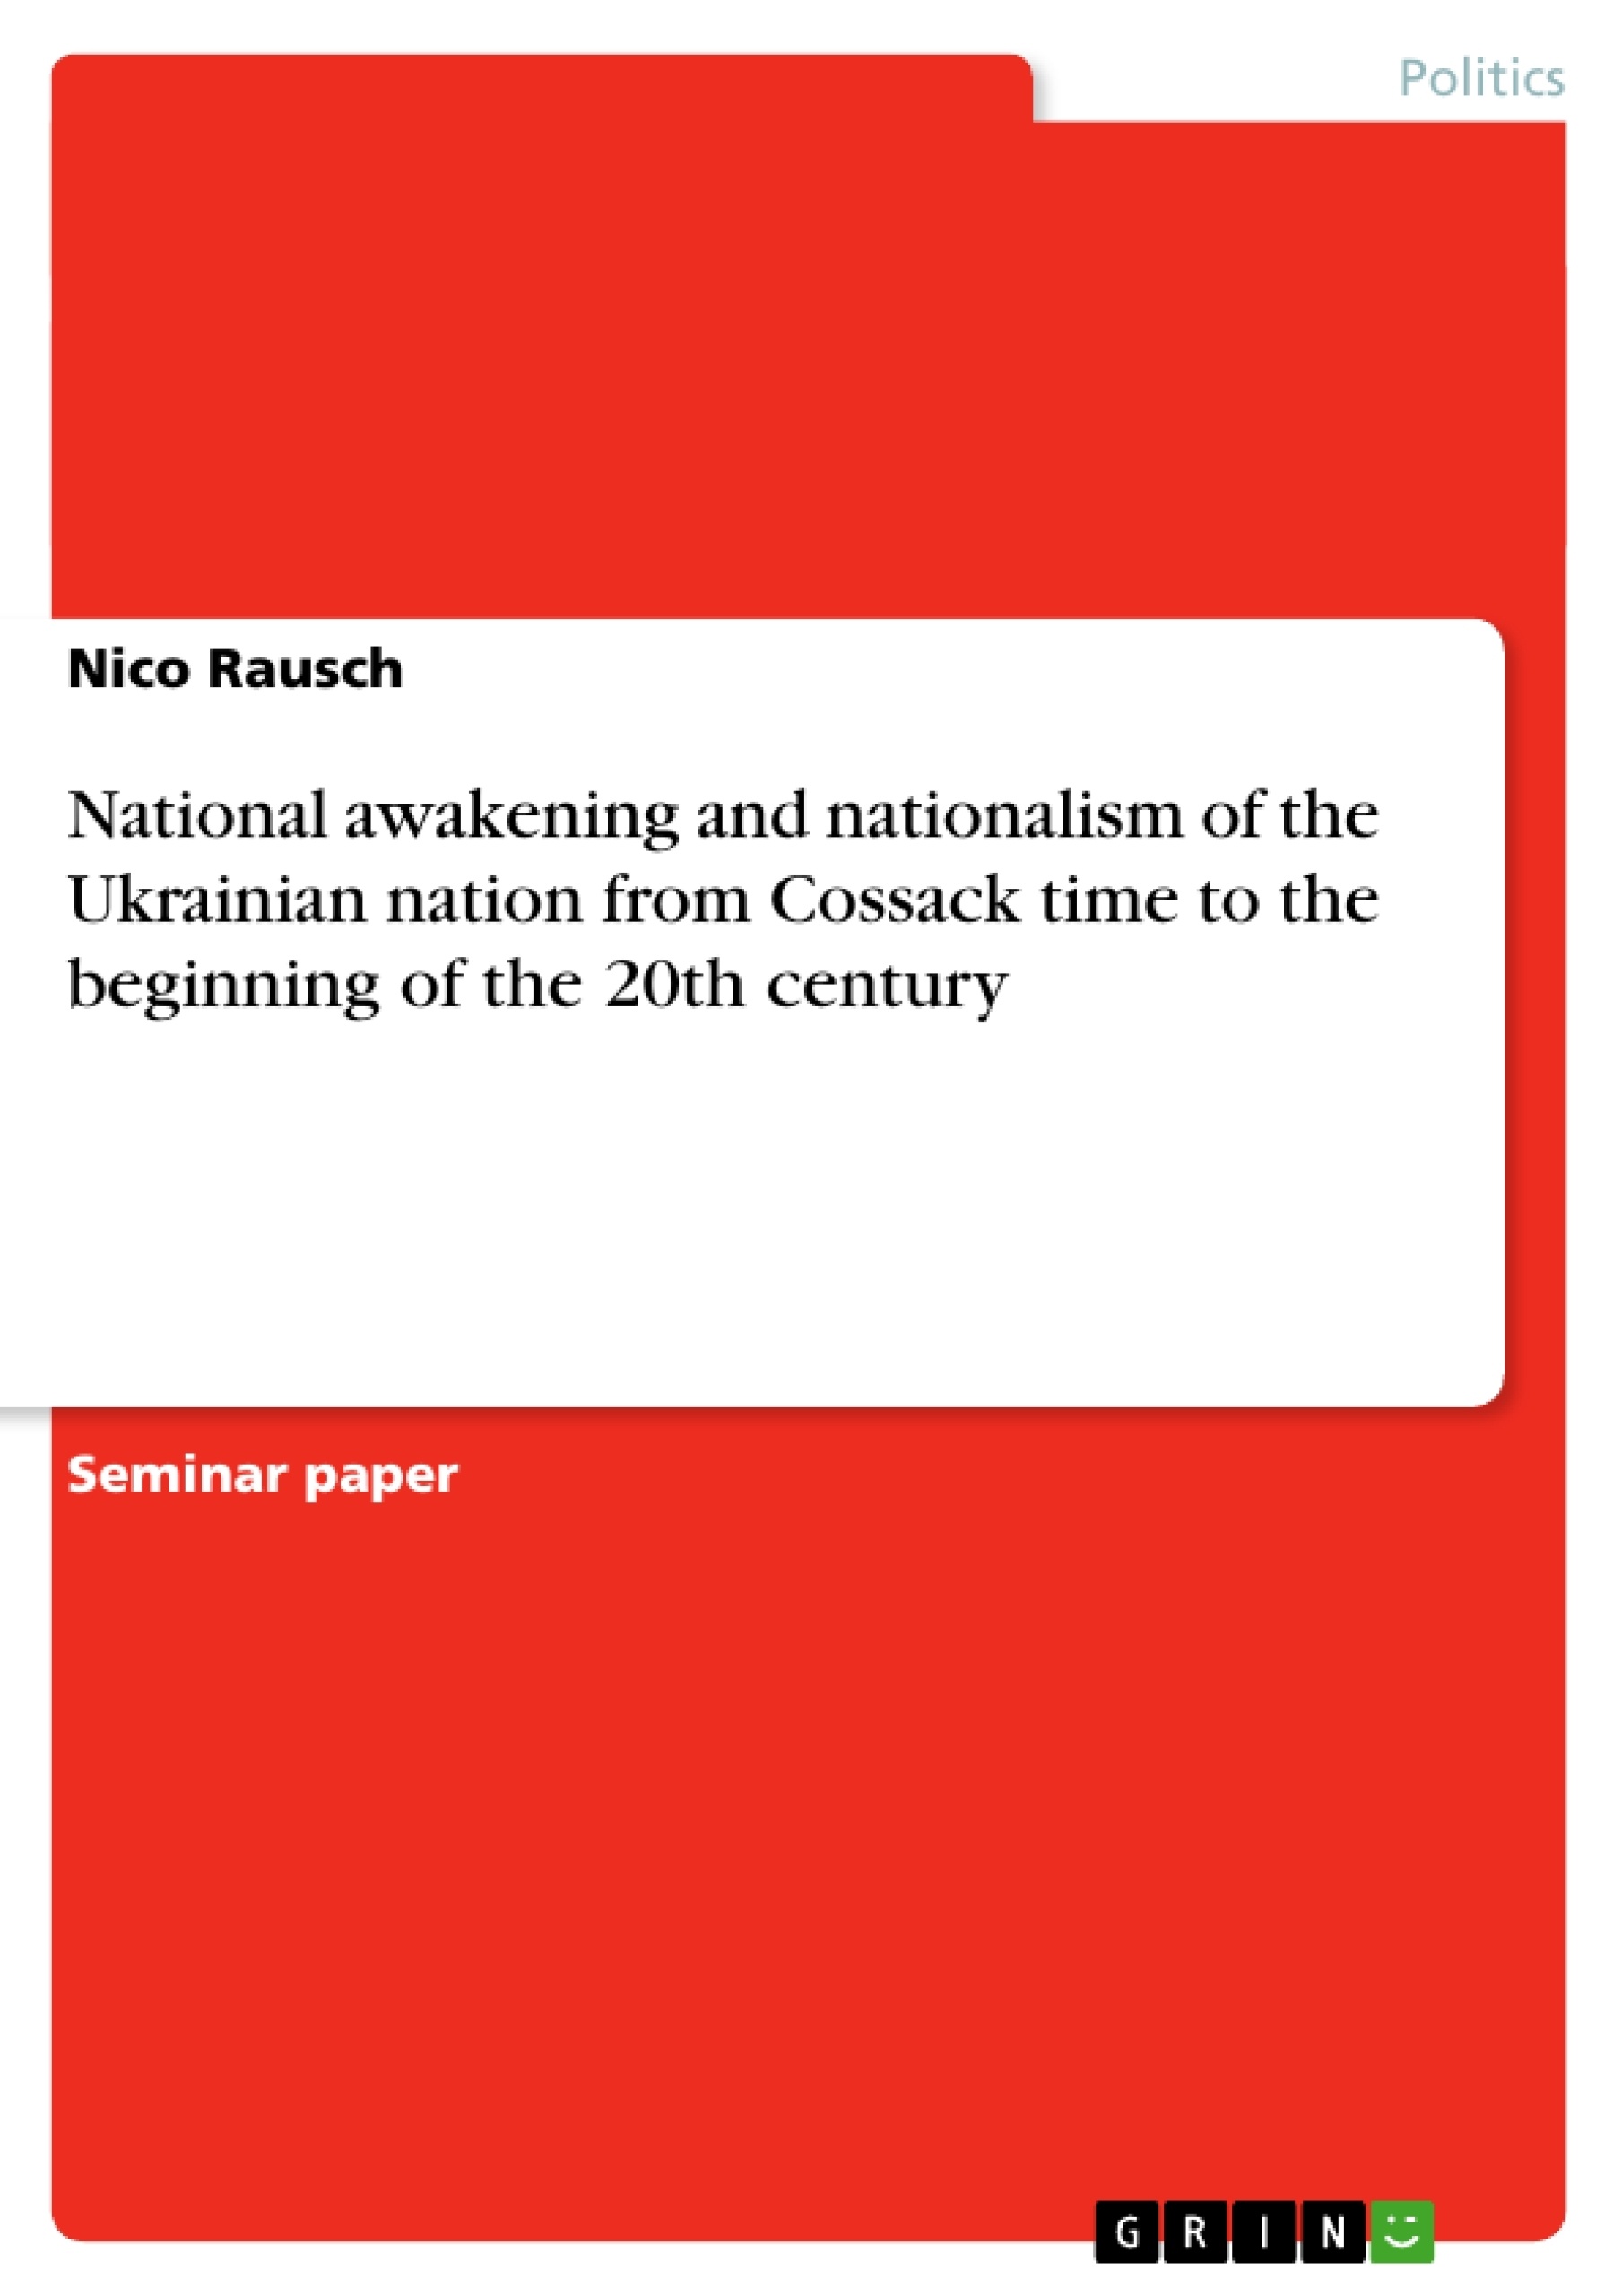 Titre: National awakening and nationalism of the Ukrainian nation from Cossack time to the beginning of the 20th century 